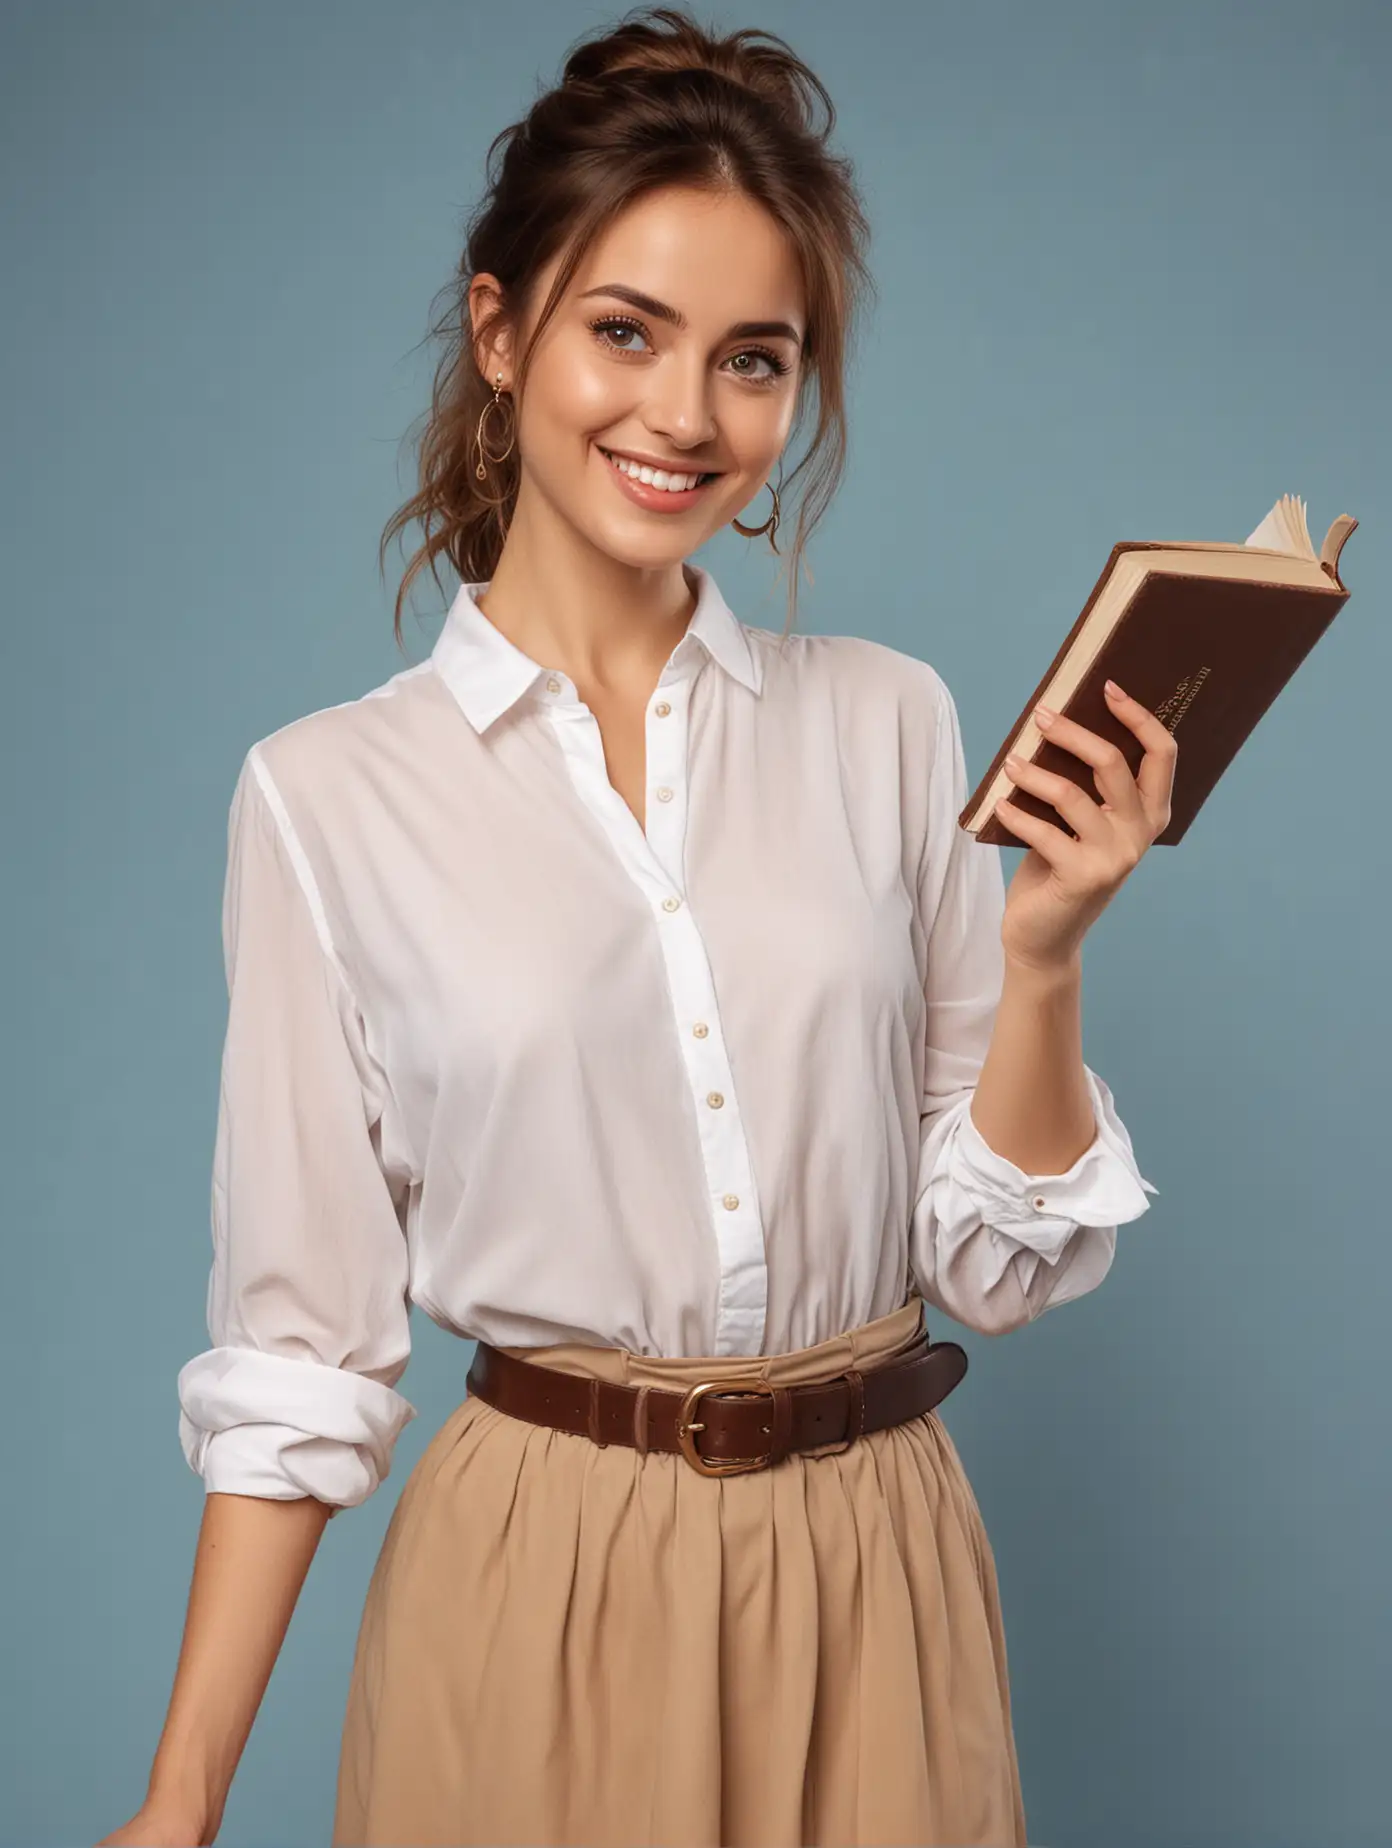 Elegant Russian Woman Offering Book with Joyful Smile on Blue Background